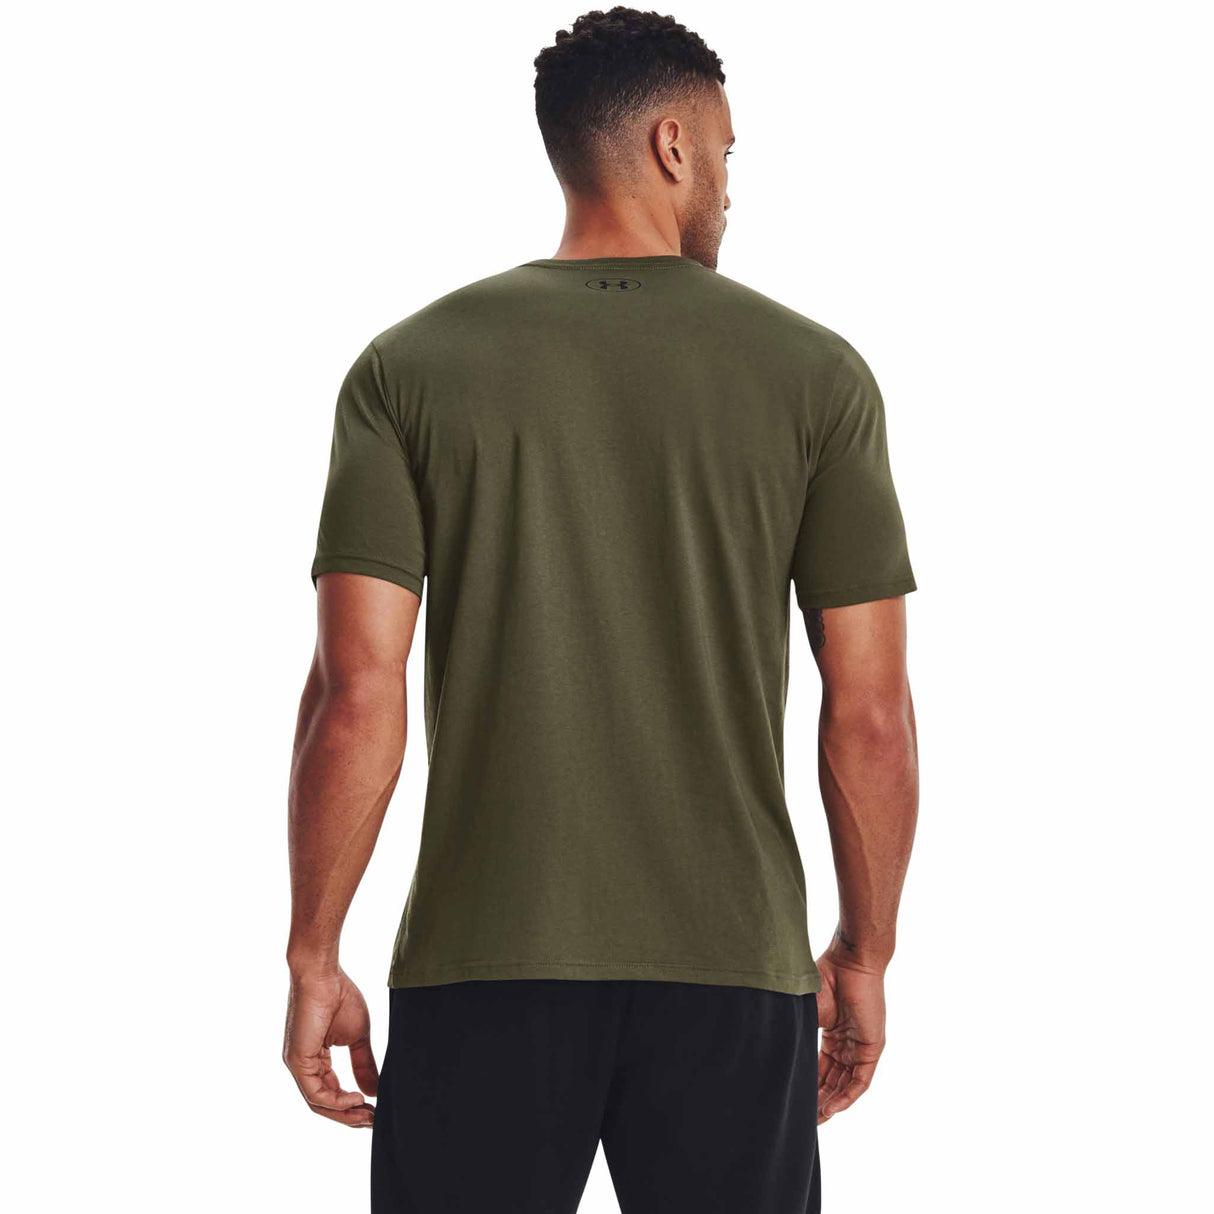 Under Armour Sportstyle t-shirt à manches courtes homme dos live  -Marine OD Green / Black